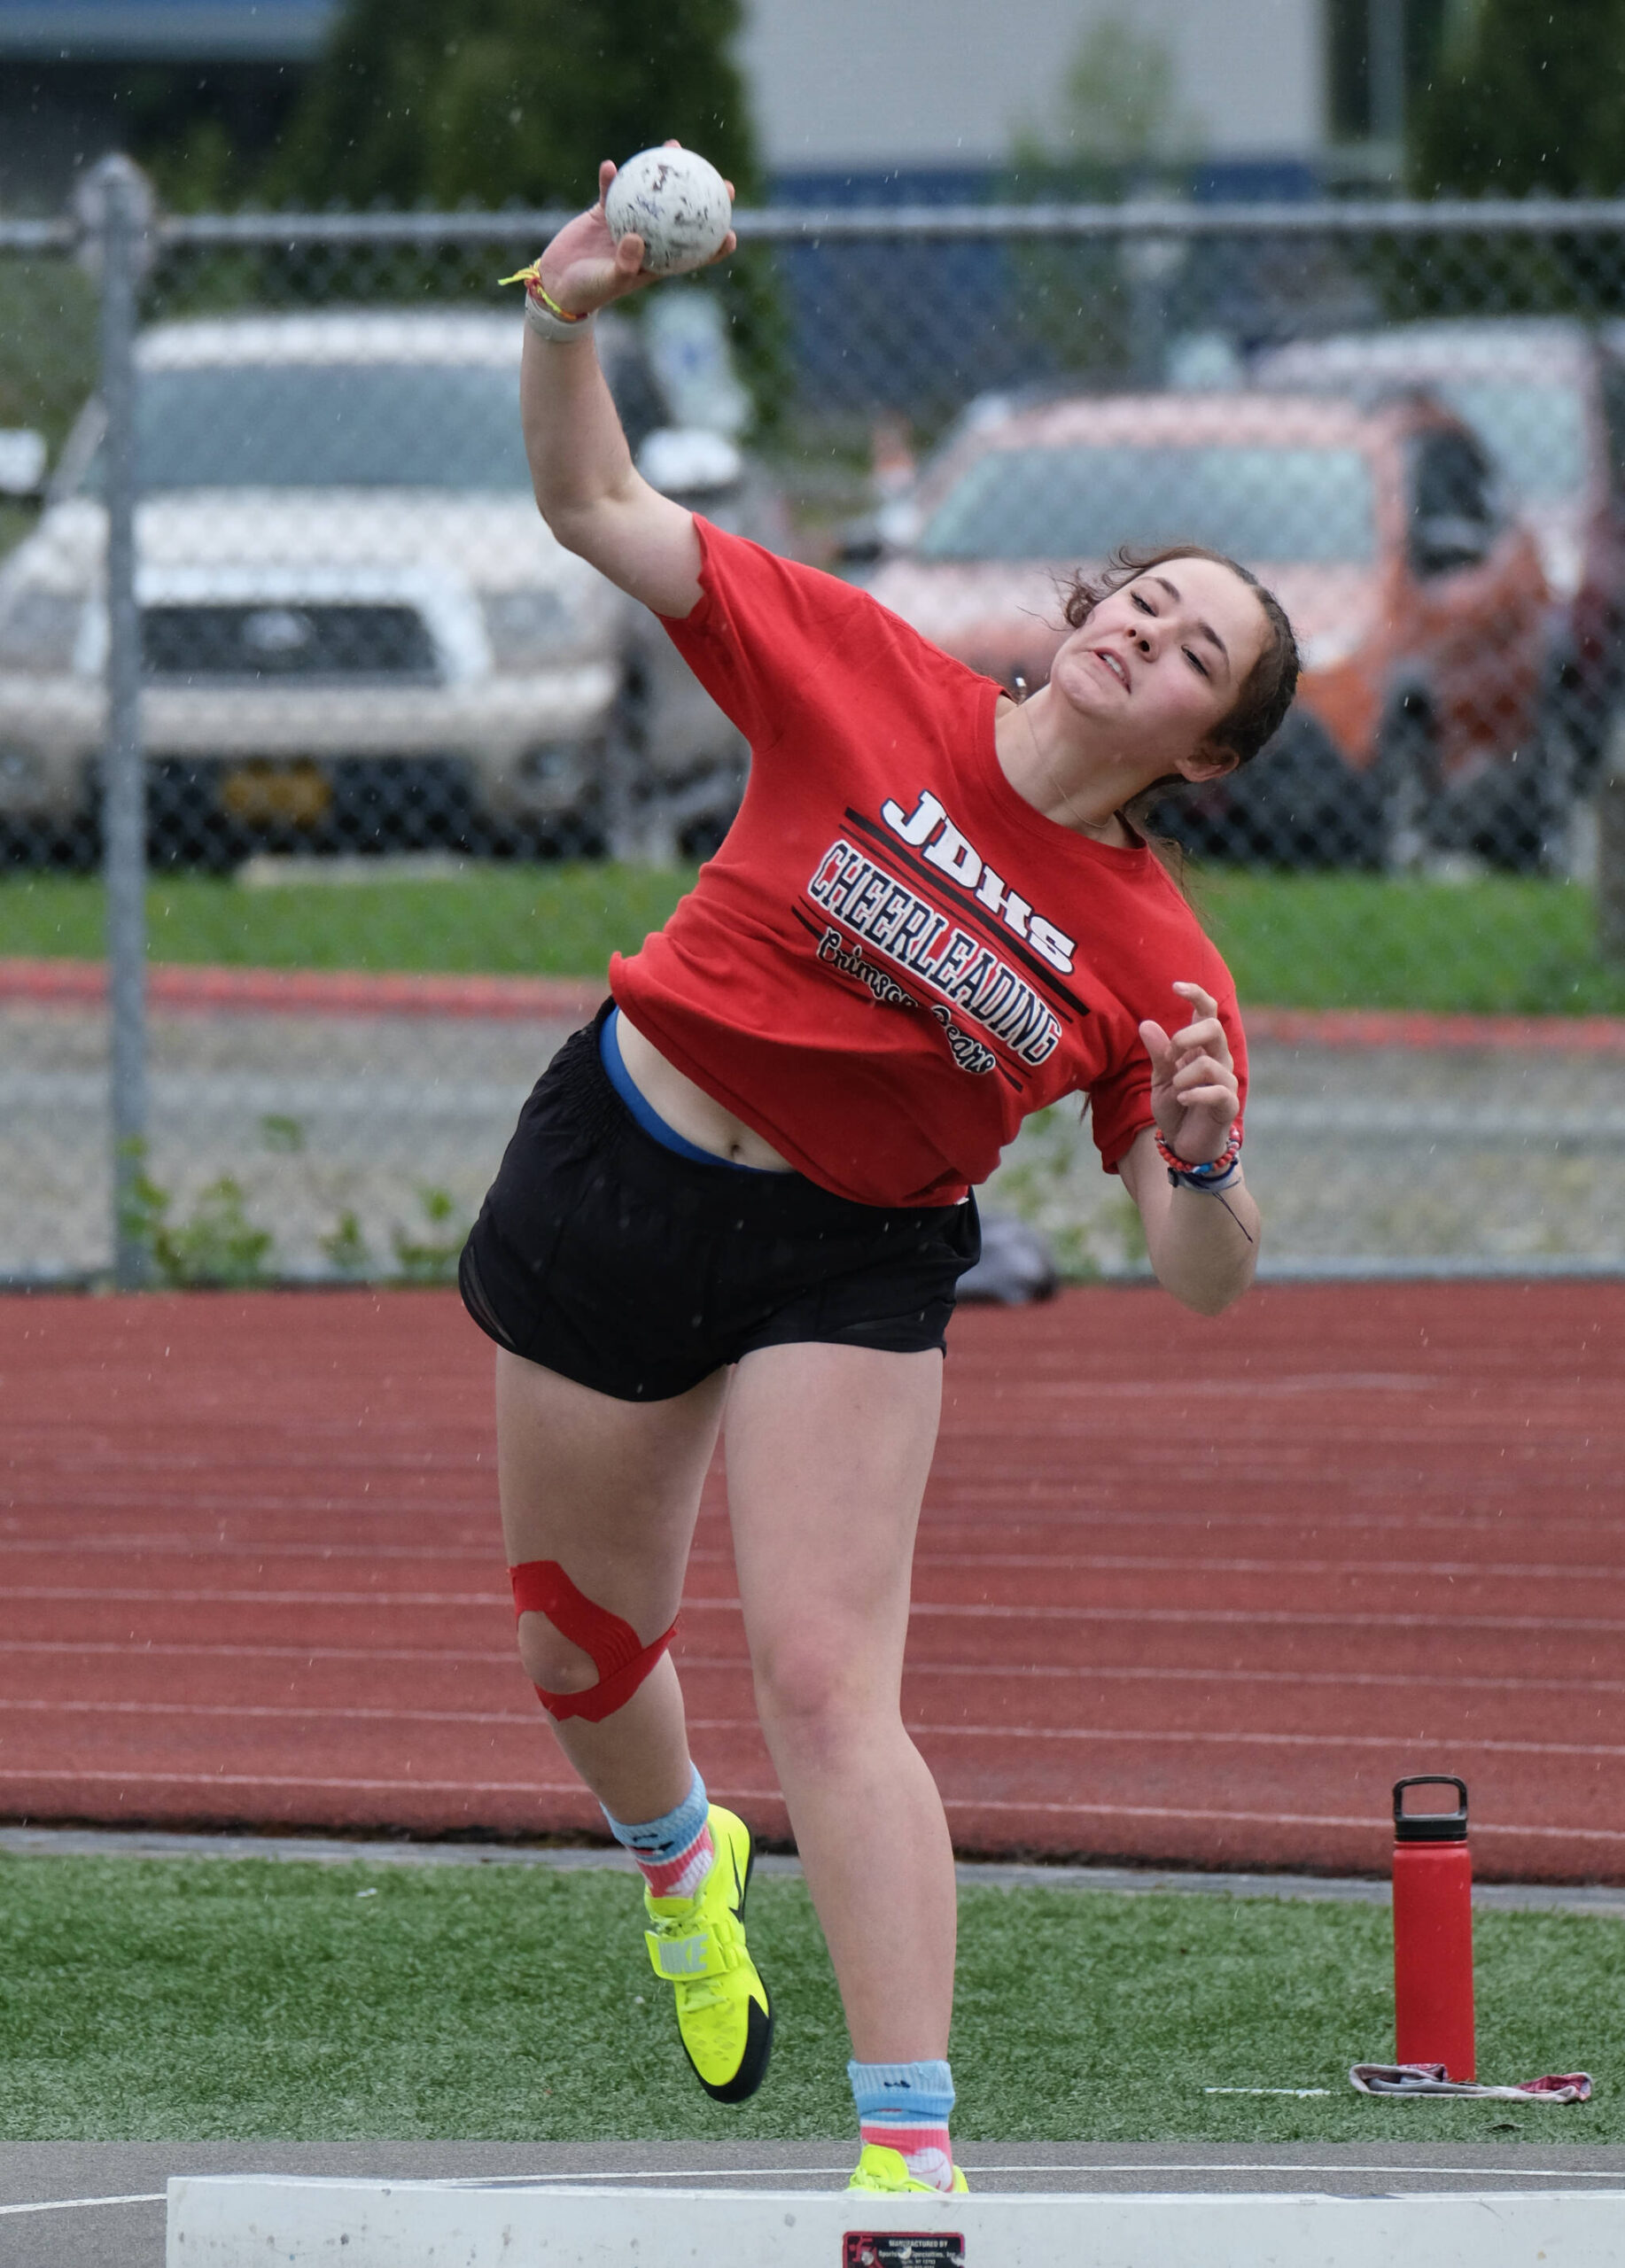 JDHS sophomore Ayla Keller wins the DI shot put during the Region V Track & Field Championships, Friday, at Thunder Mountain. The championships resume Saturday. (Klas Stolpe / Juneau Empire)